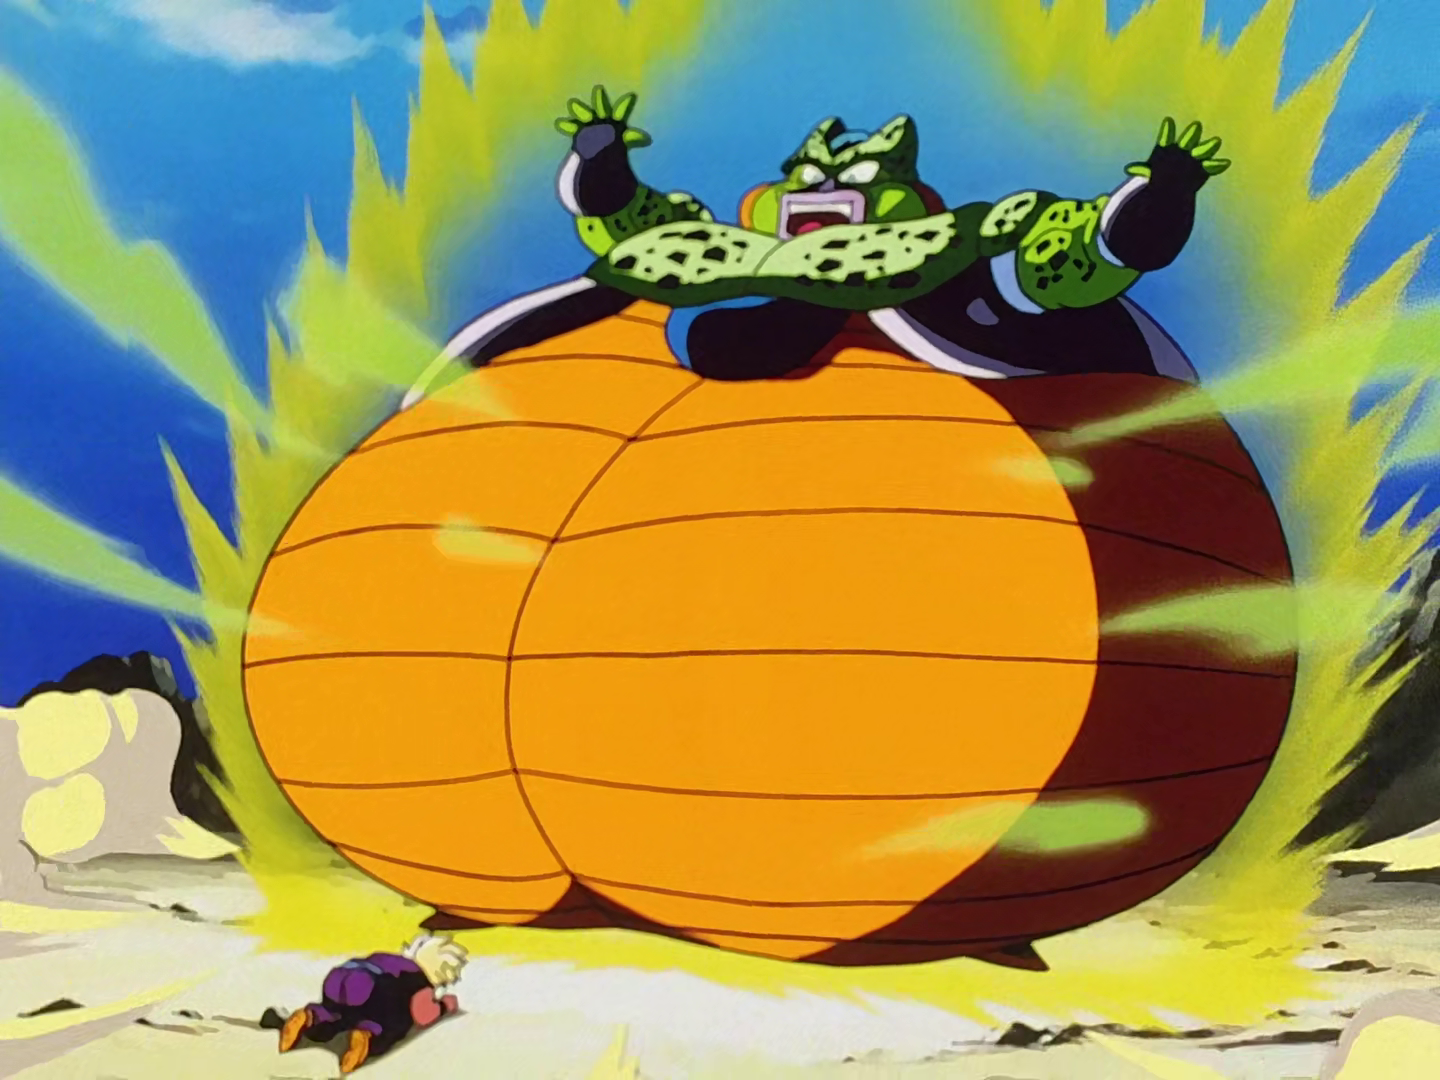 "Boy, this is the end for you! You thought you could beat me, but you can't! Ha ha ha! I'm going to blow myself up now! And I'm going to take you with me! Say goodbye to your precious planet!" - Semi-Perfect Cell